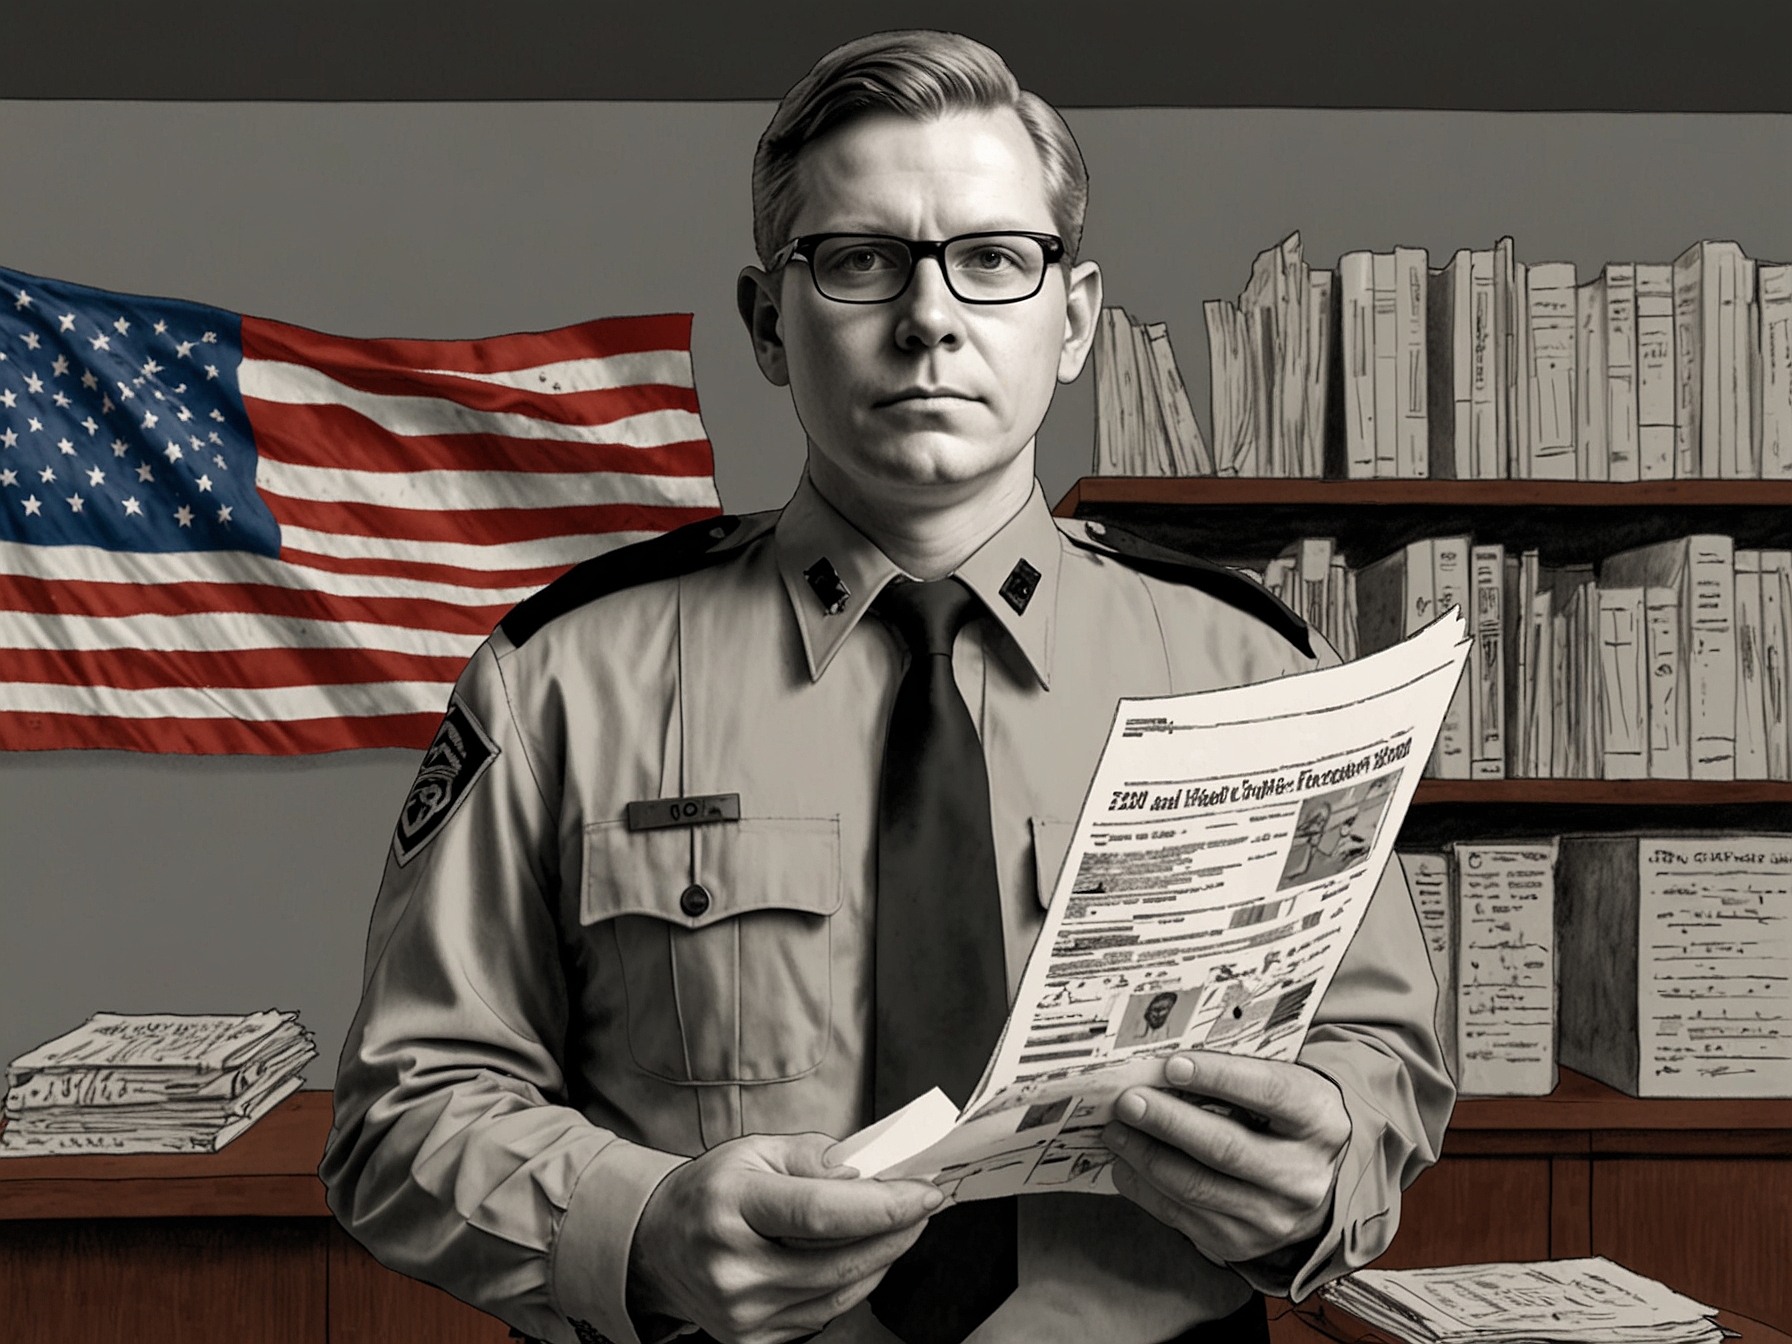 An image of a federal officer with legal documents, symbolizing the regulatory crackdown on telehealth companies like Done Global for improper distribution of controlled substances.